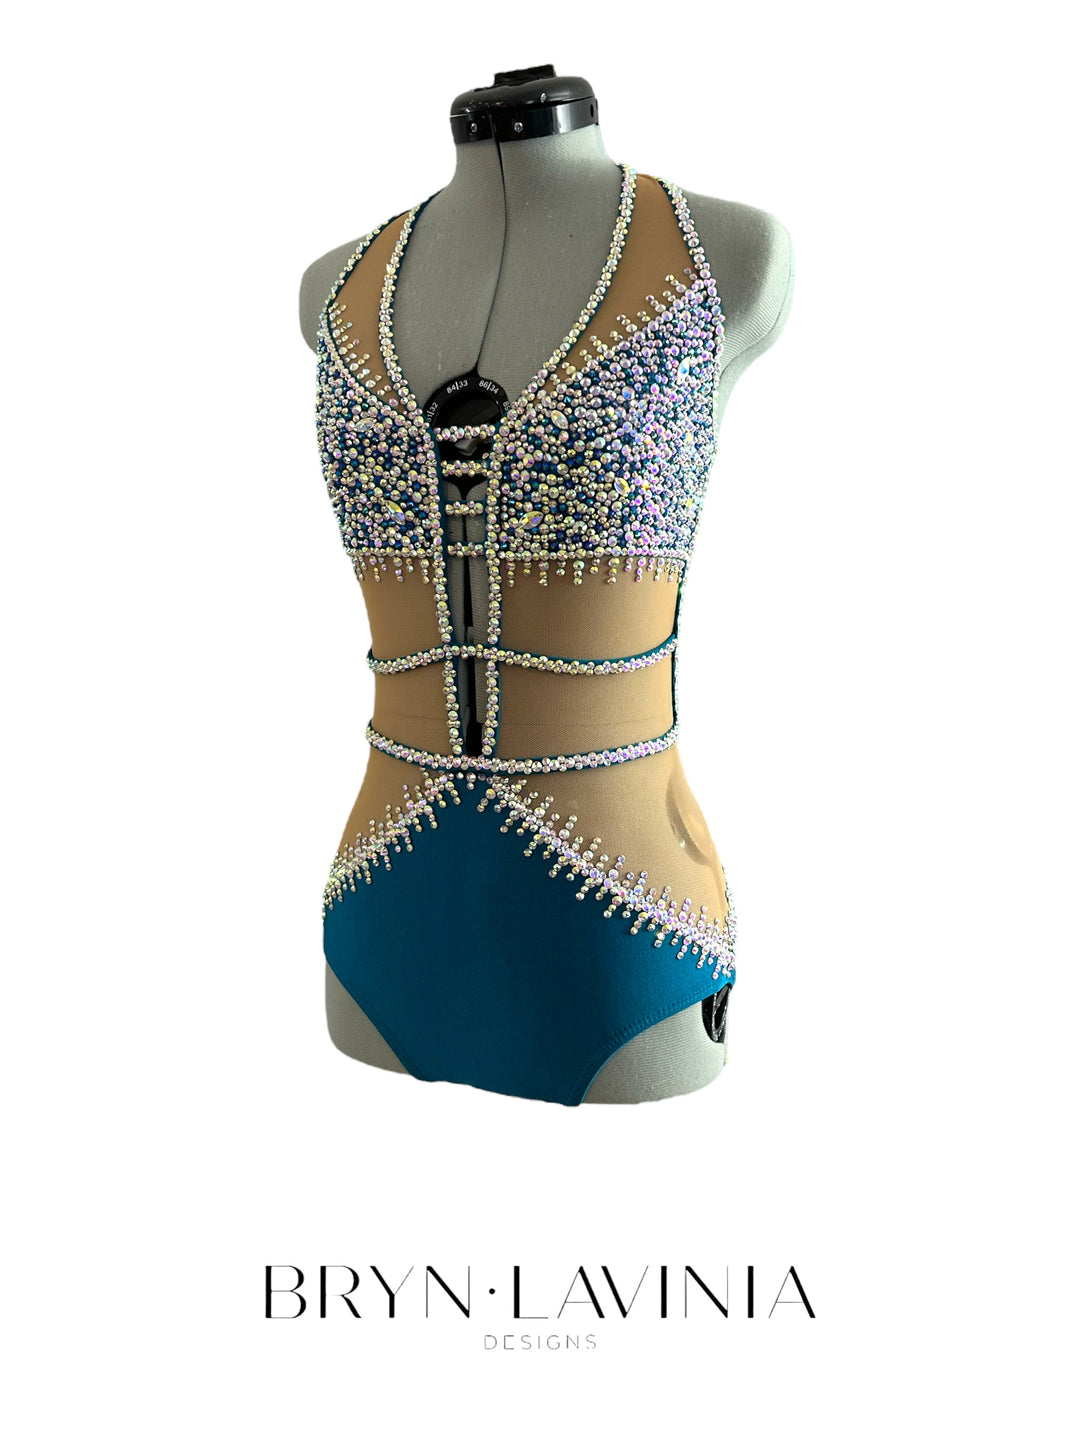 NEW AXS dark teal ready to ship costume